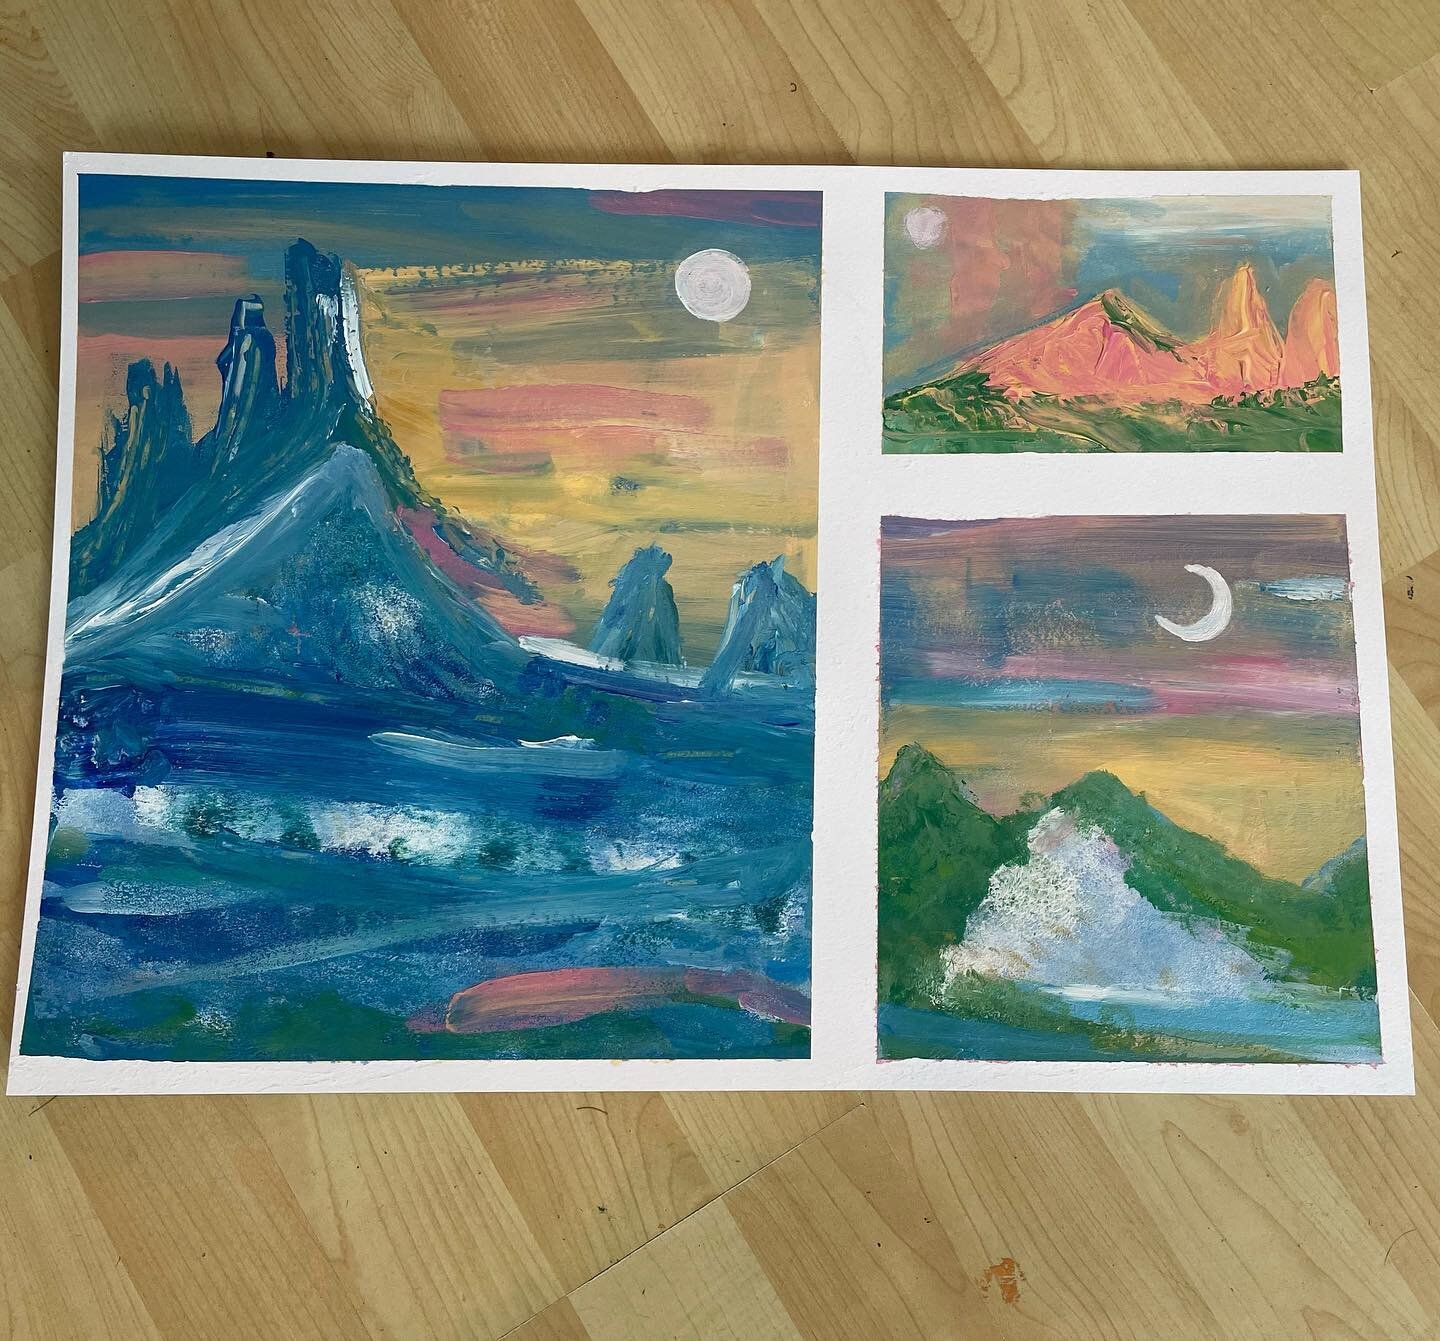 🌙 moons
🏔️ mountains
💫magnificence 

This weeks art class based on this wonderful card I chose this week. Will post the meaning in stories. Felt apt. ❤️